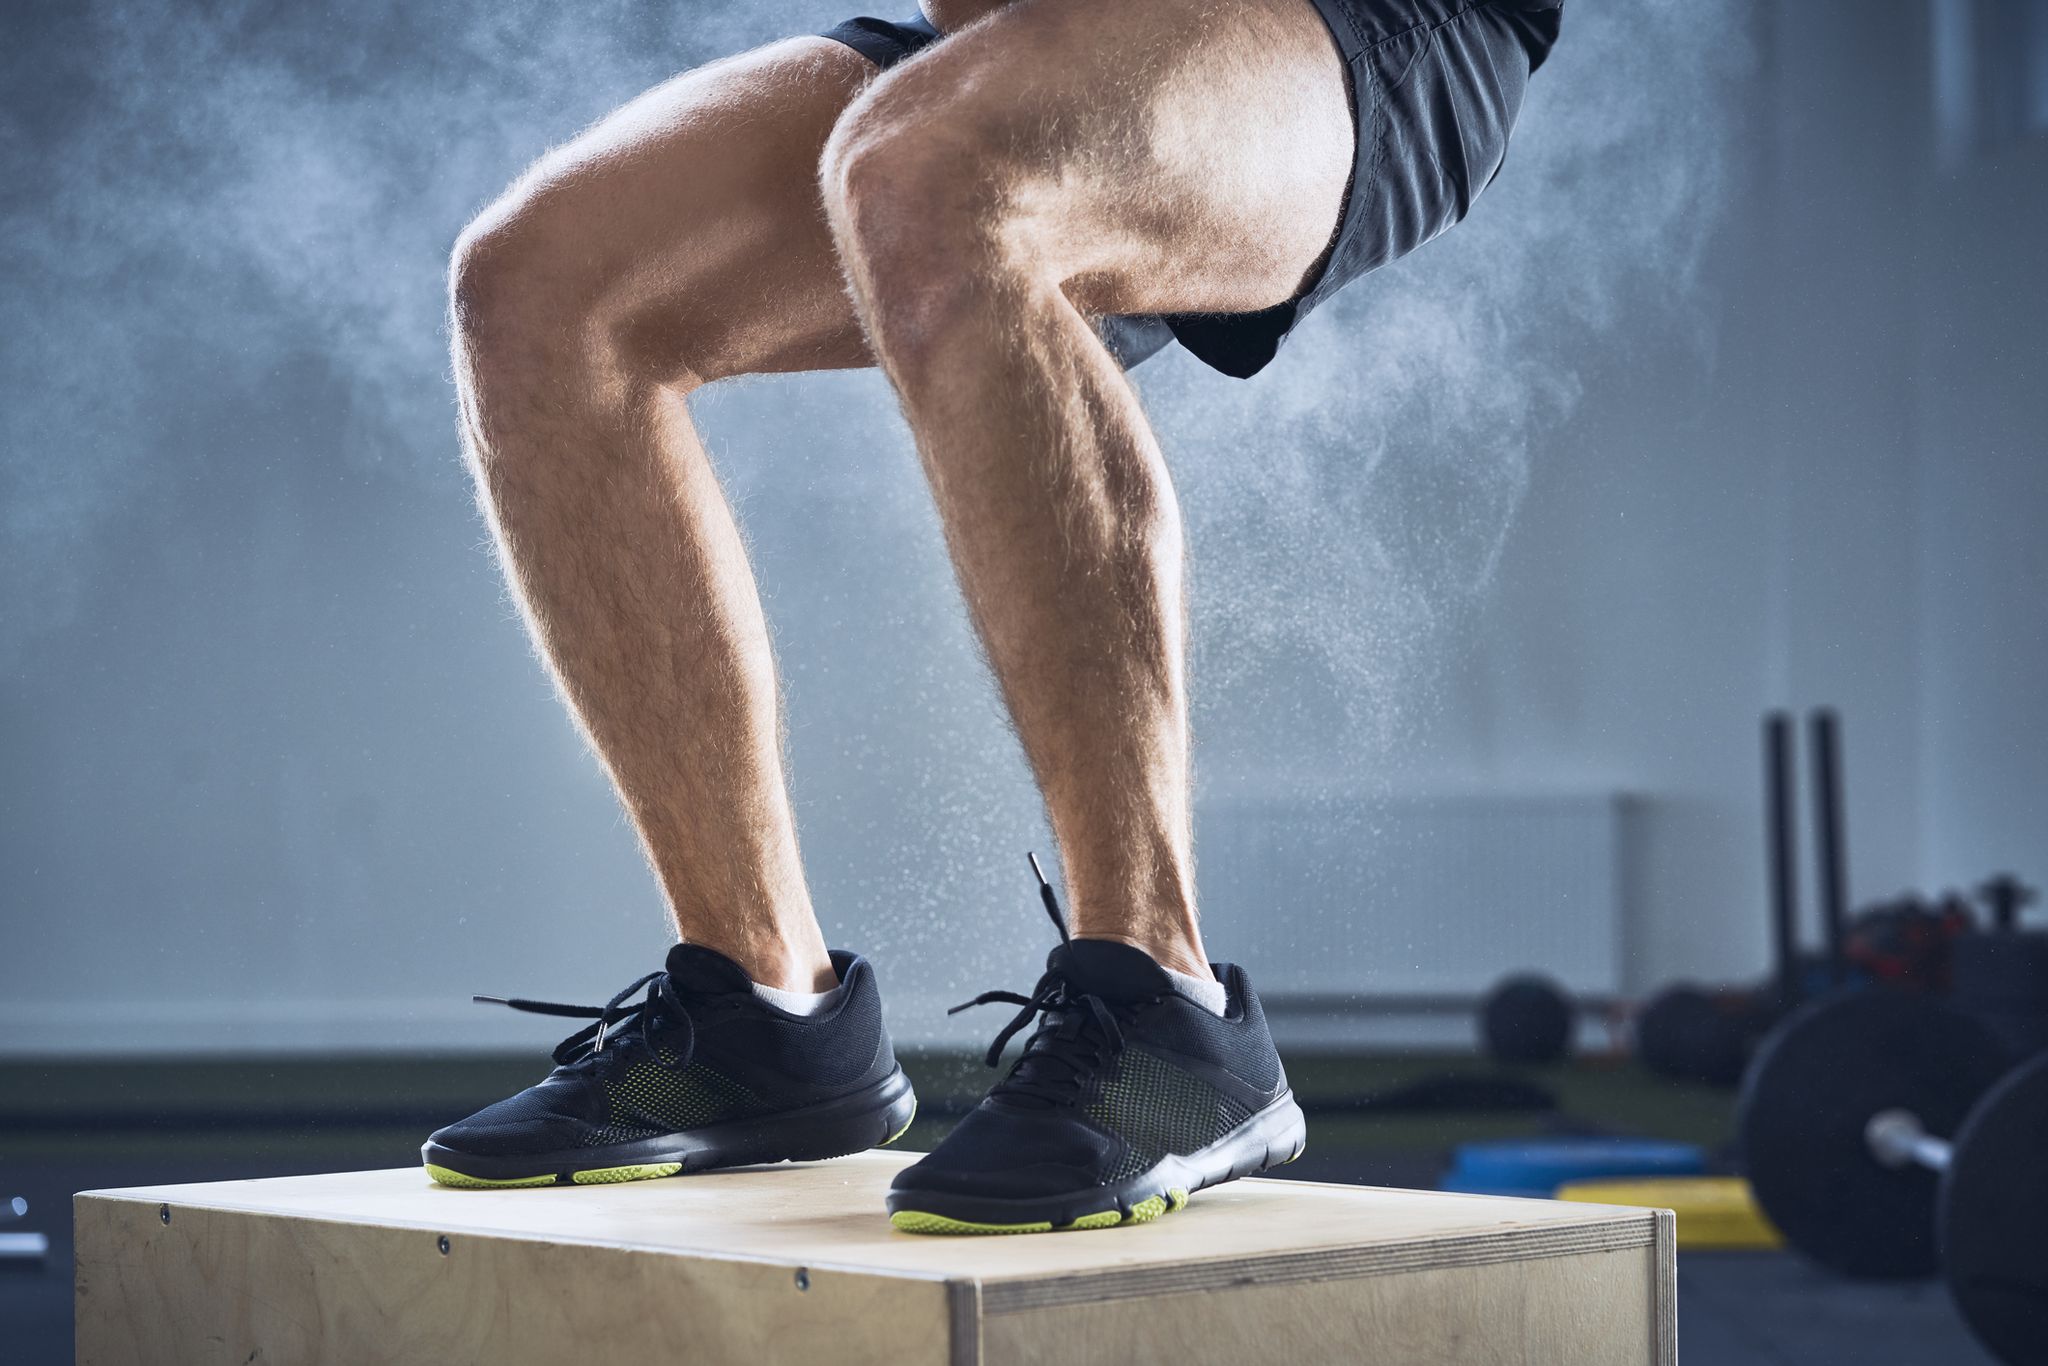 https://hips.hearstapps.com/hmg-prod/images/closeup-of-man-doing-box-jump-exercise-at-gym-royalty-free-image-1610722191.?crop=1.00xw:1.00xh;0,0&resize=2048:*